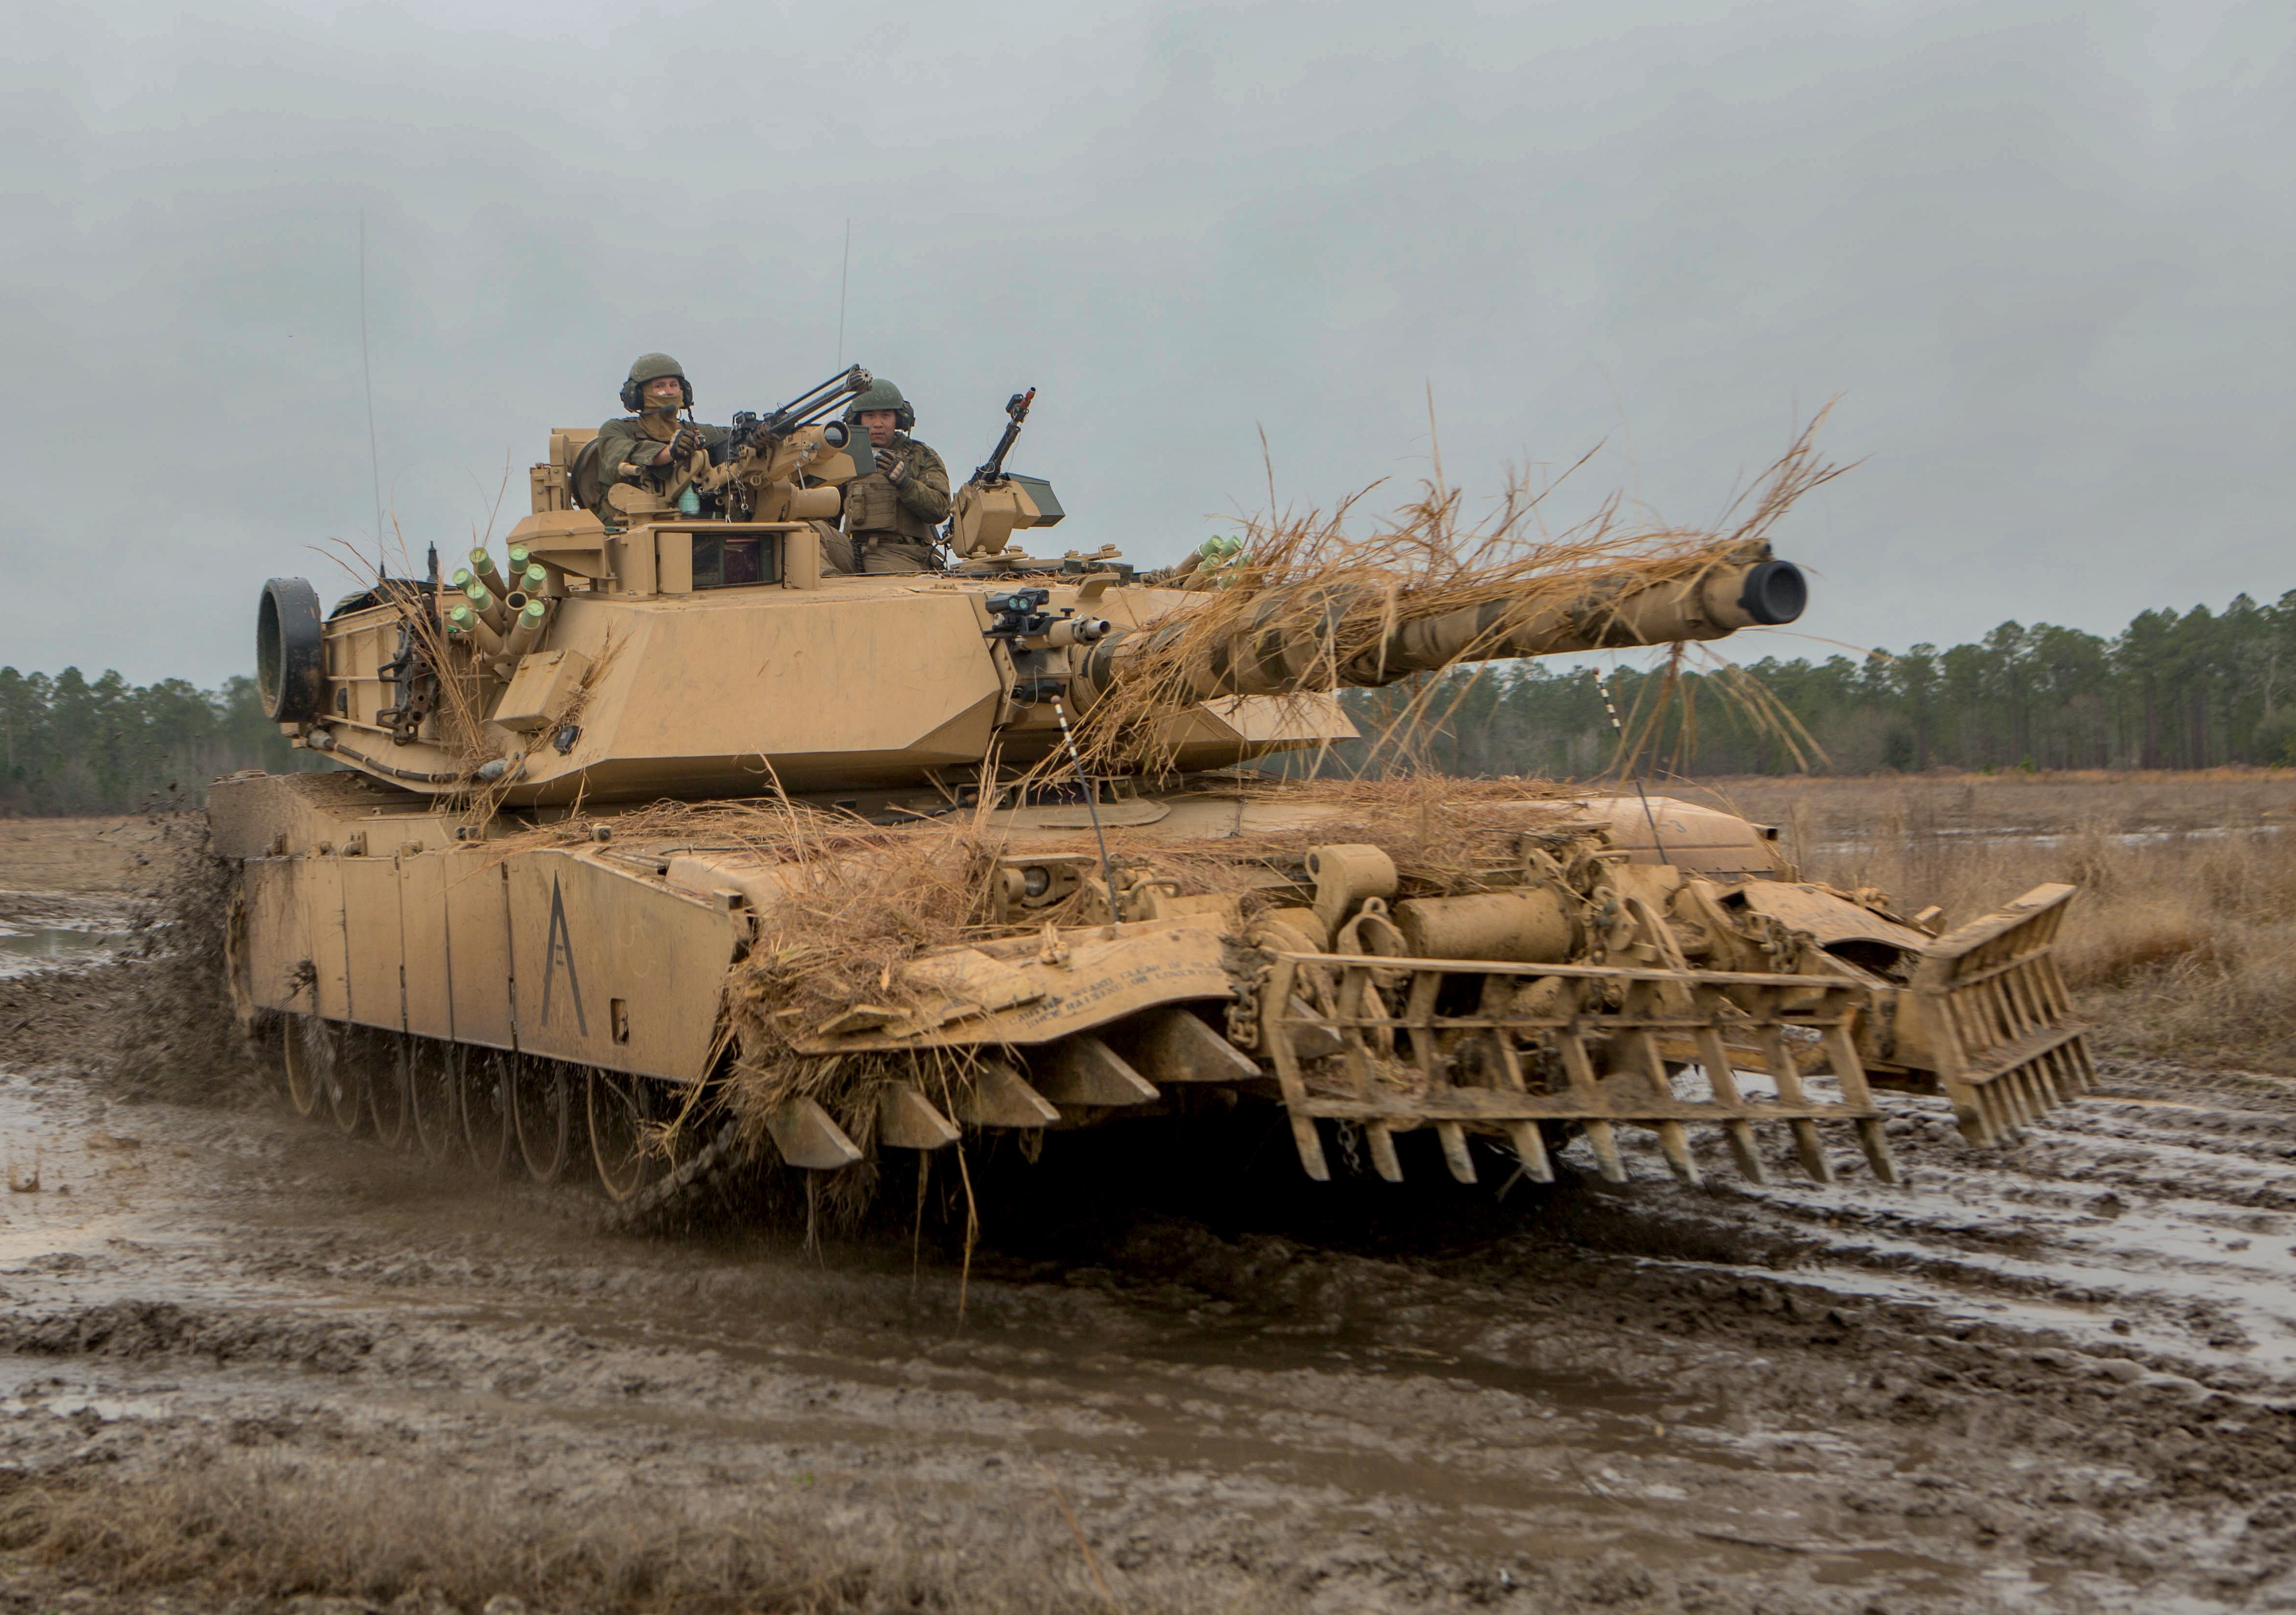 New Marine Corps Will Slash All Tanks, Many Heavy Weapons As Focus Shifts to Lighter, Littoral Forces - USNI News